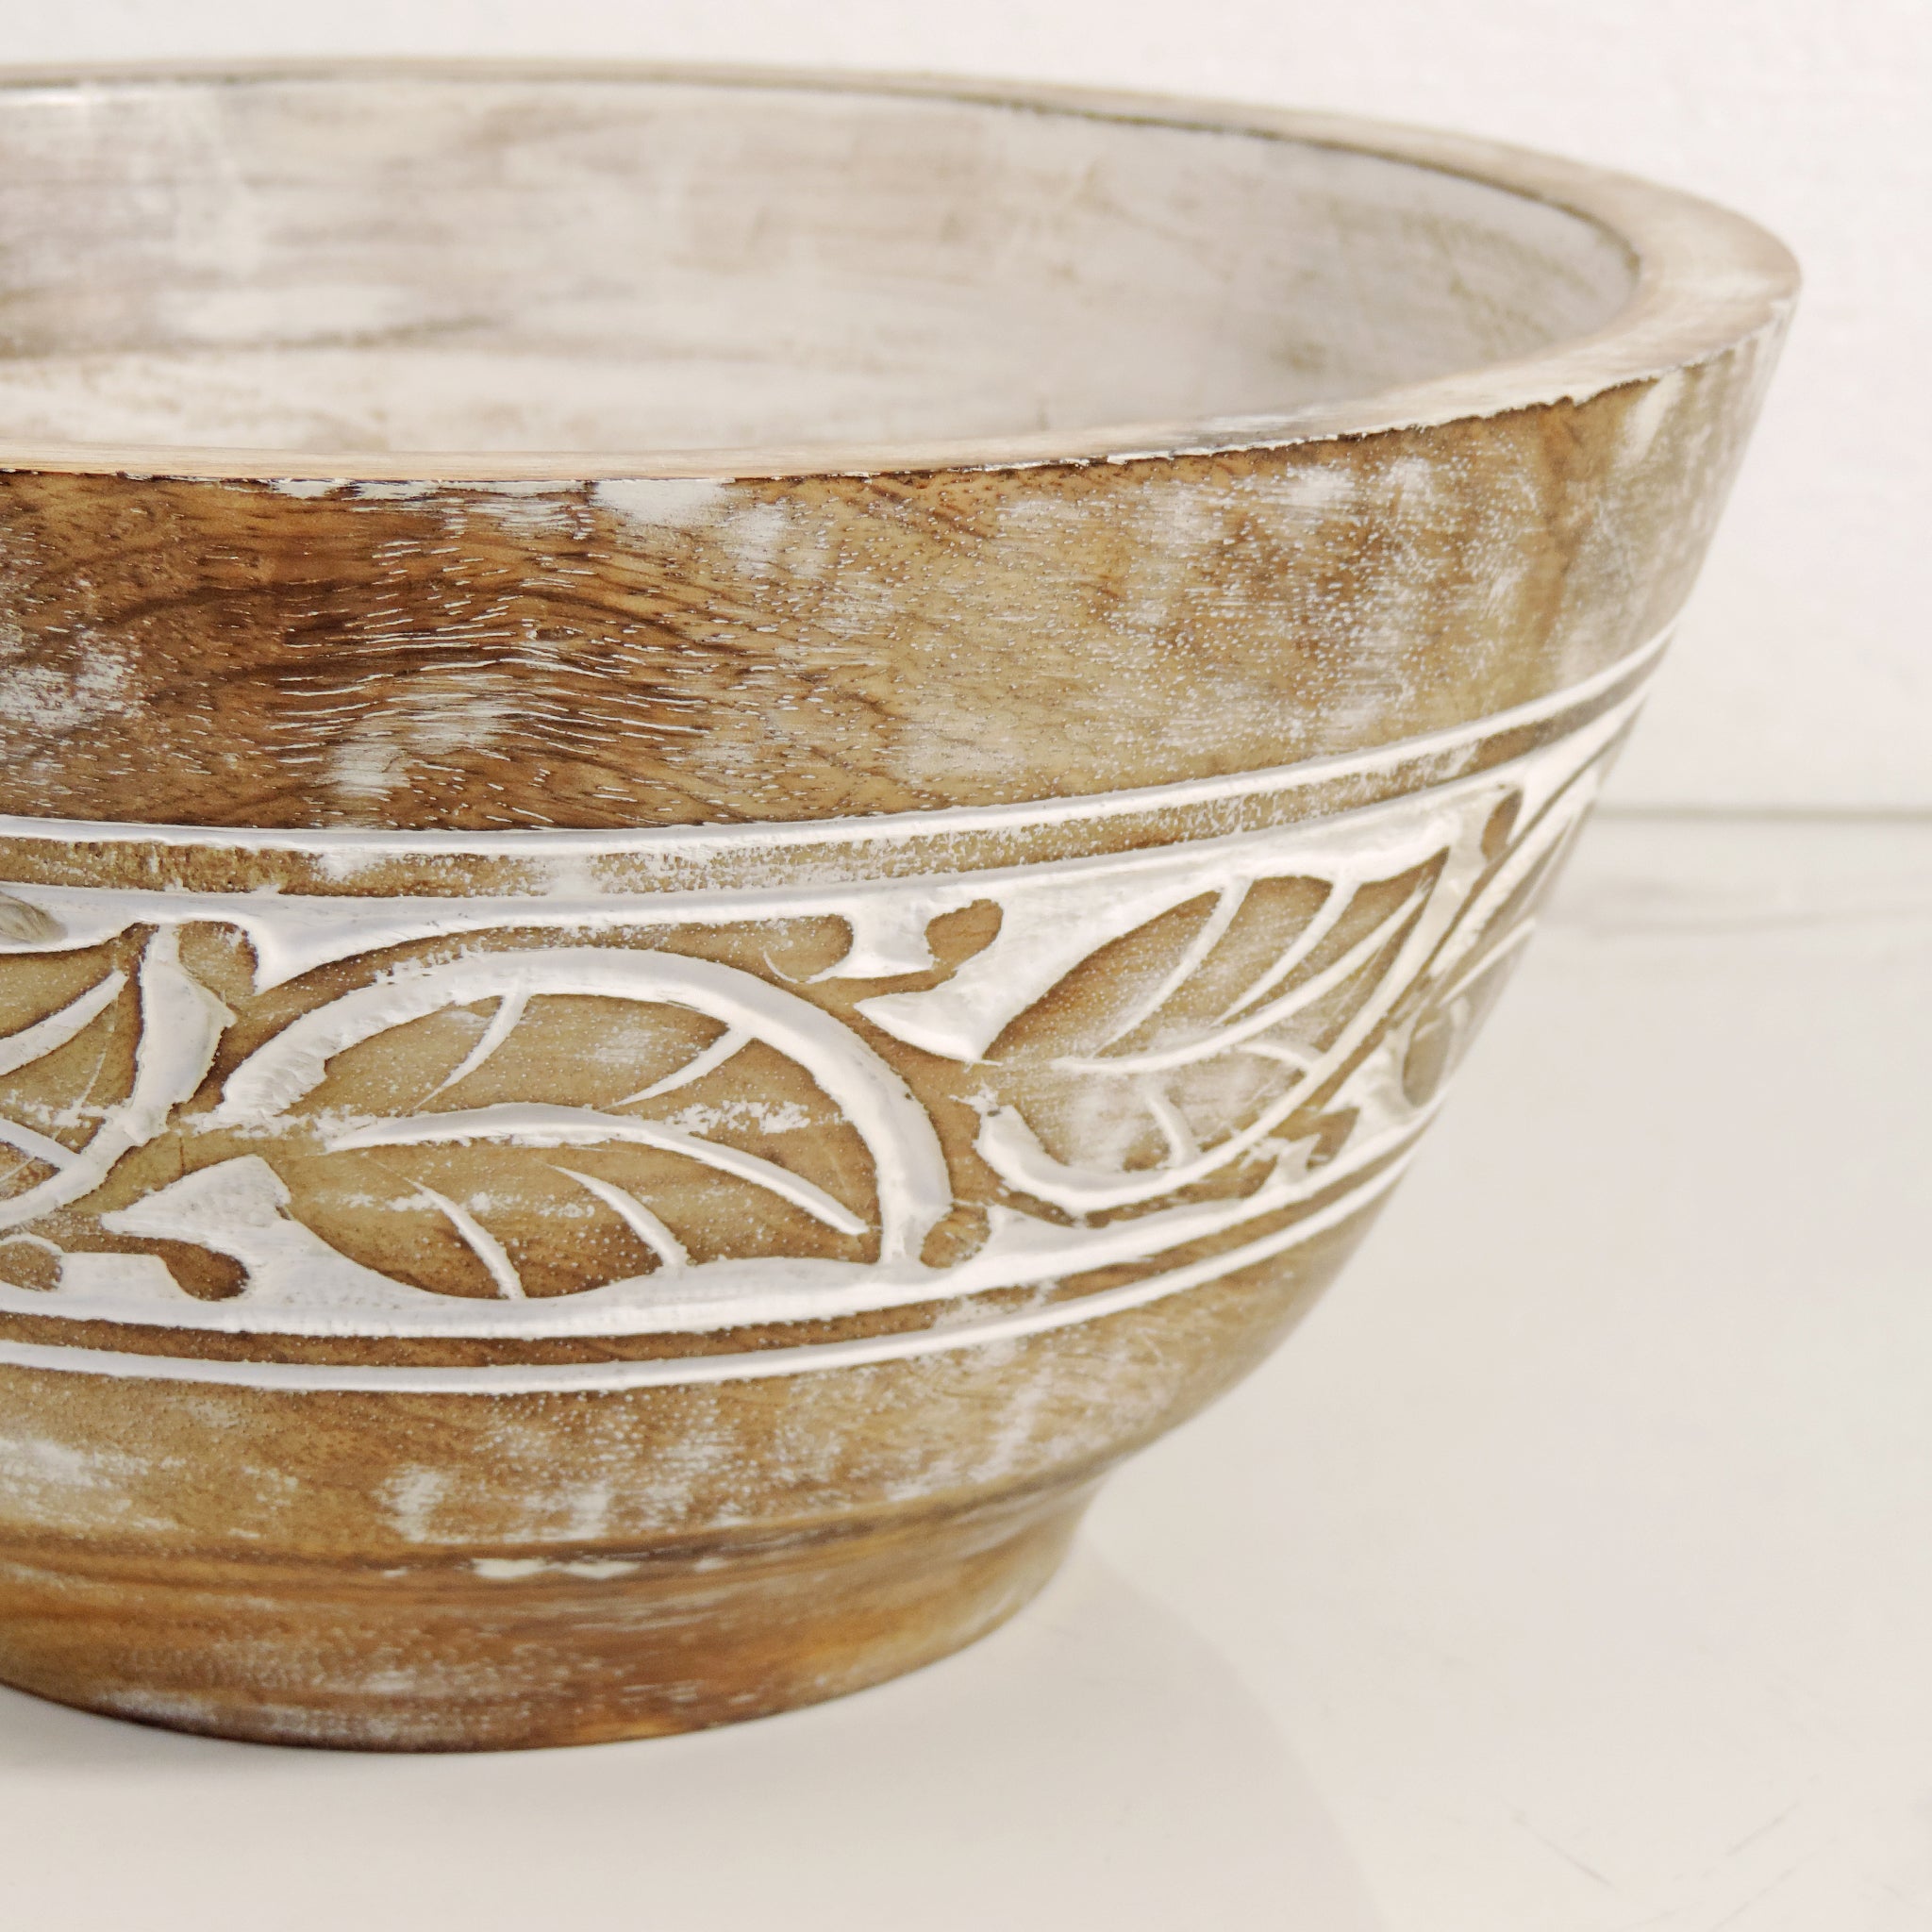 Rustic Salad Bowl Flower with White wash- 10"x5" Inch